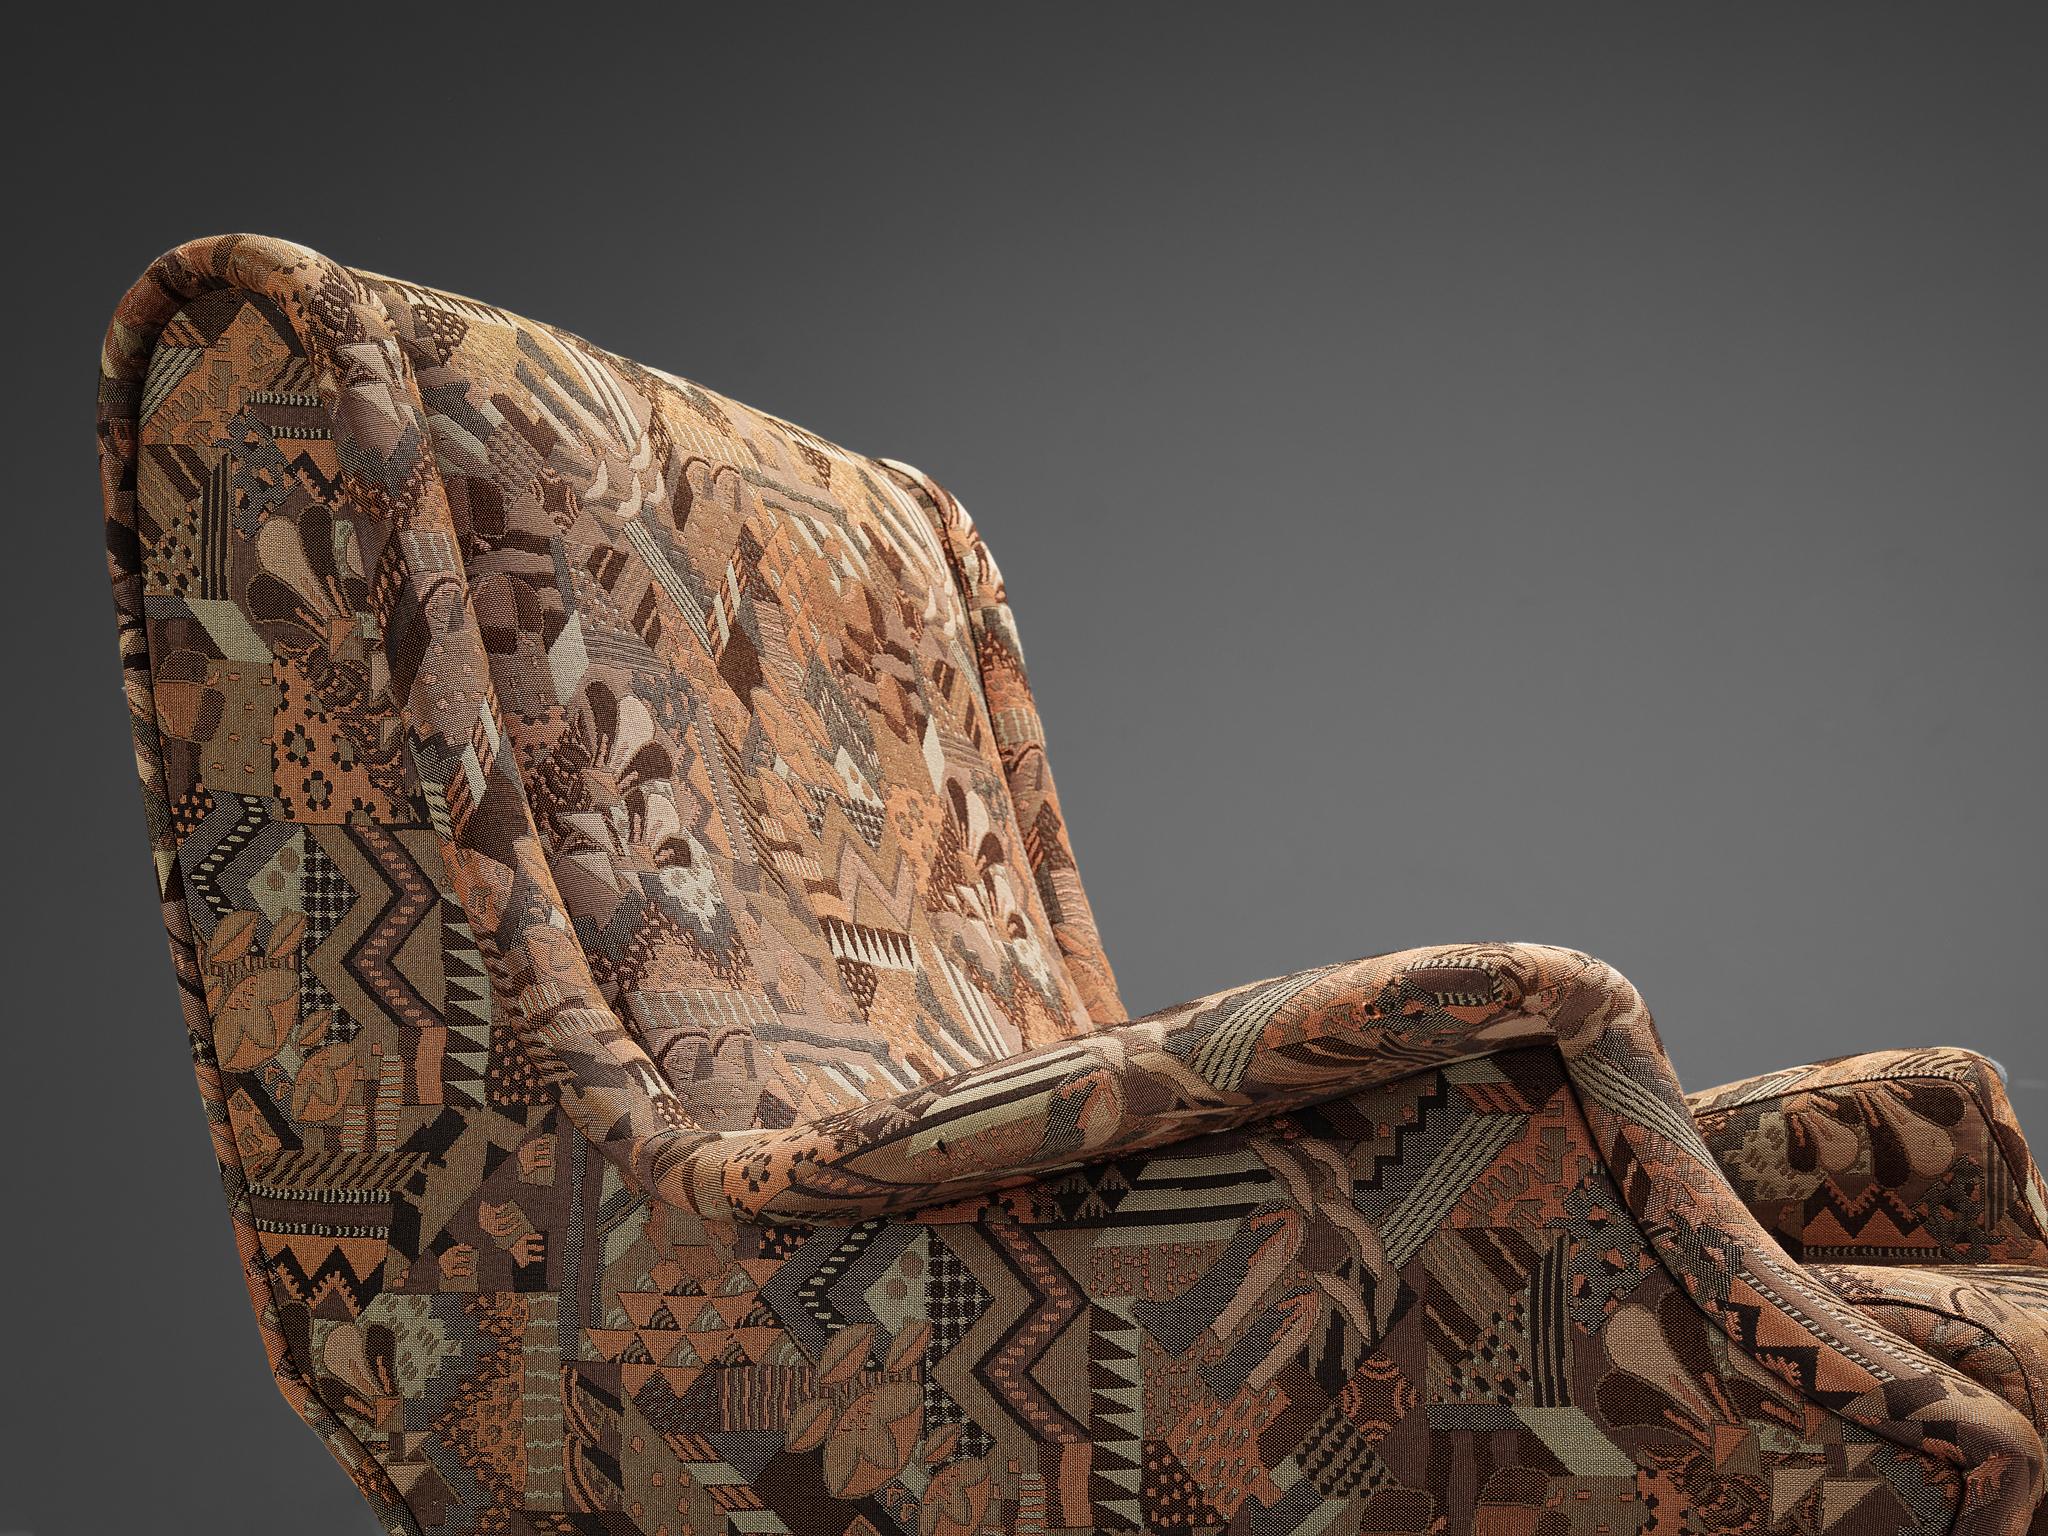 Marco Zanuso for Arflex 'Regent' Lounge Chair in Patterned Upholstery